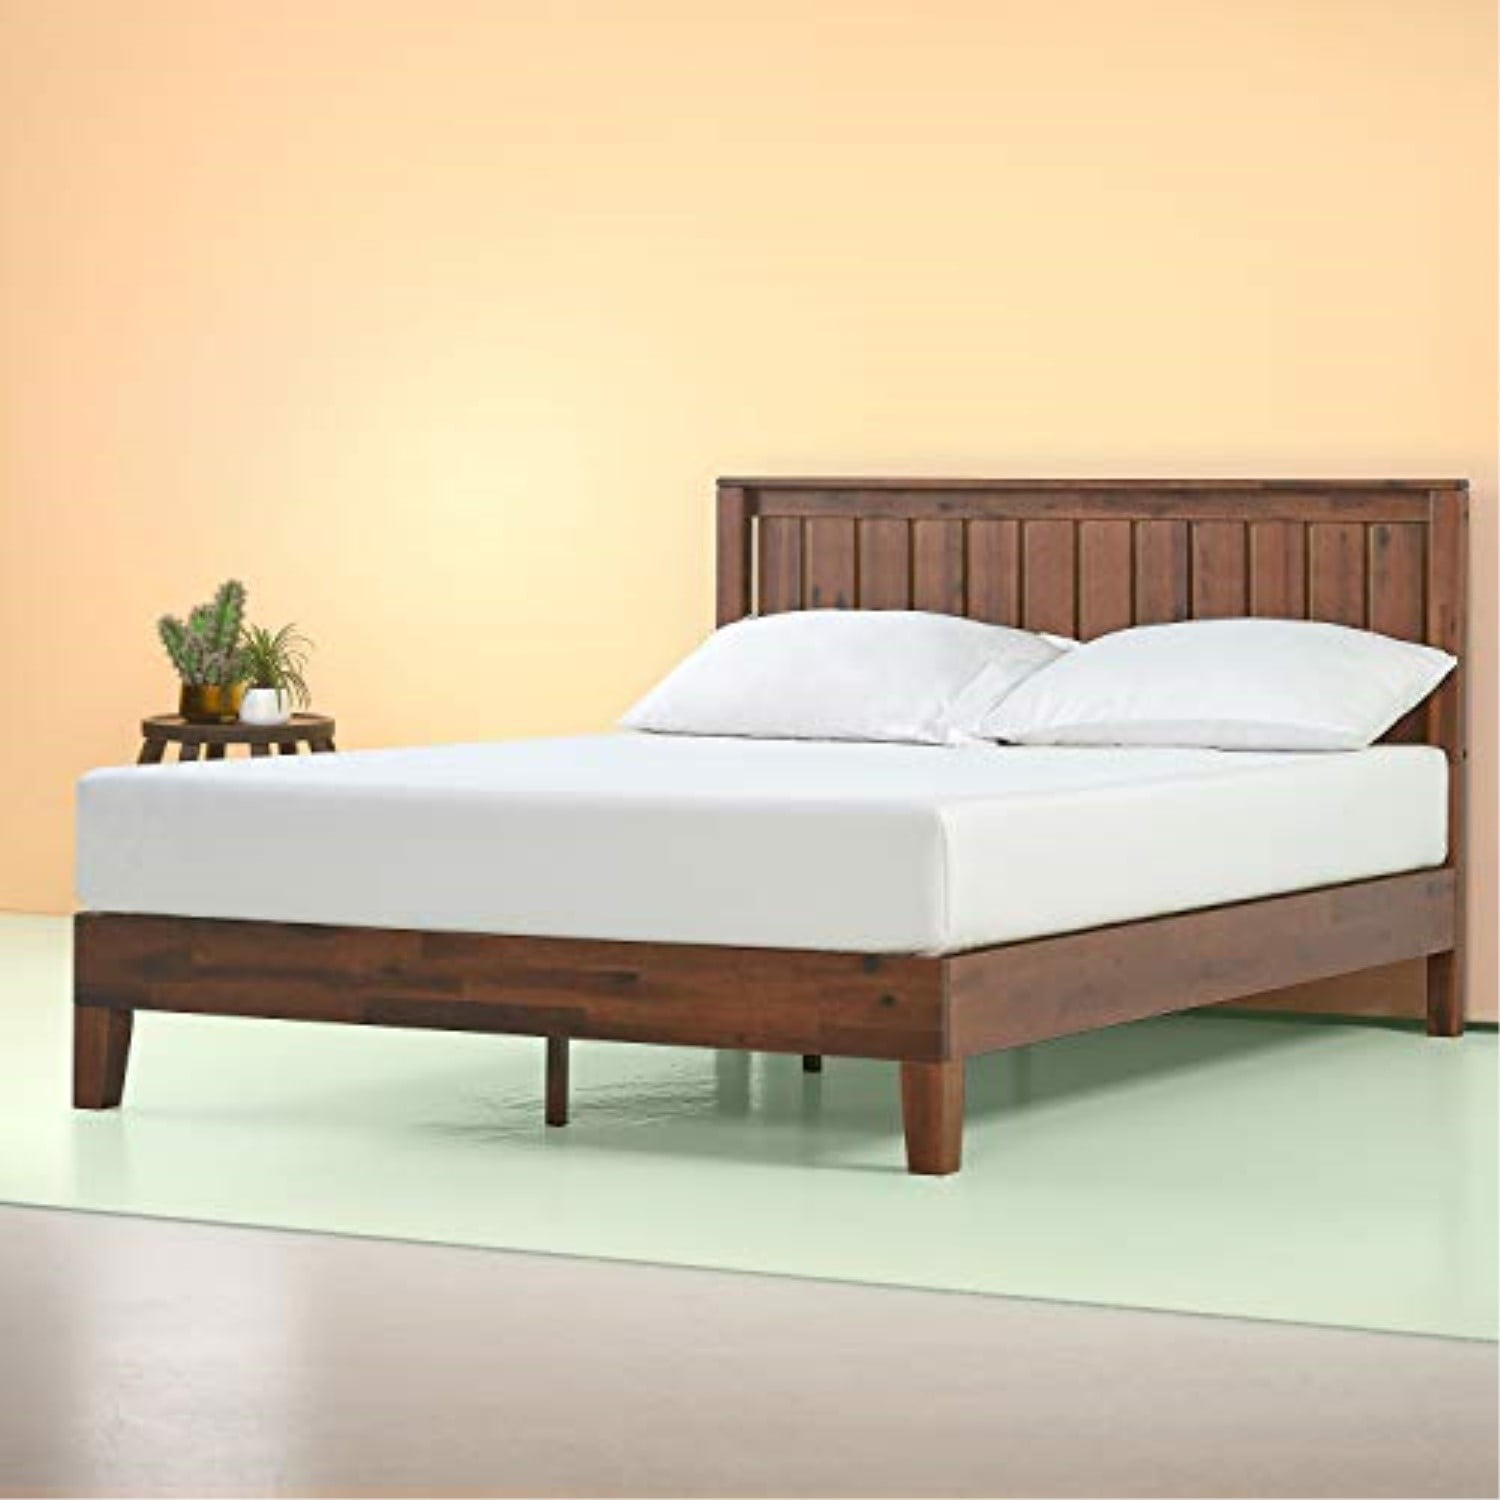 Deluxe Wood Platform Bed With Headboard, Zinus King Bed Frame With Headboard